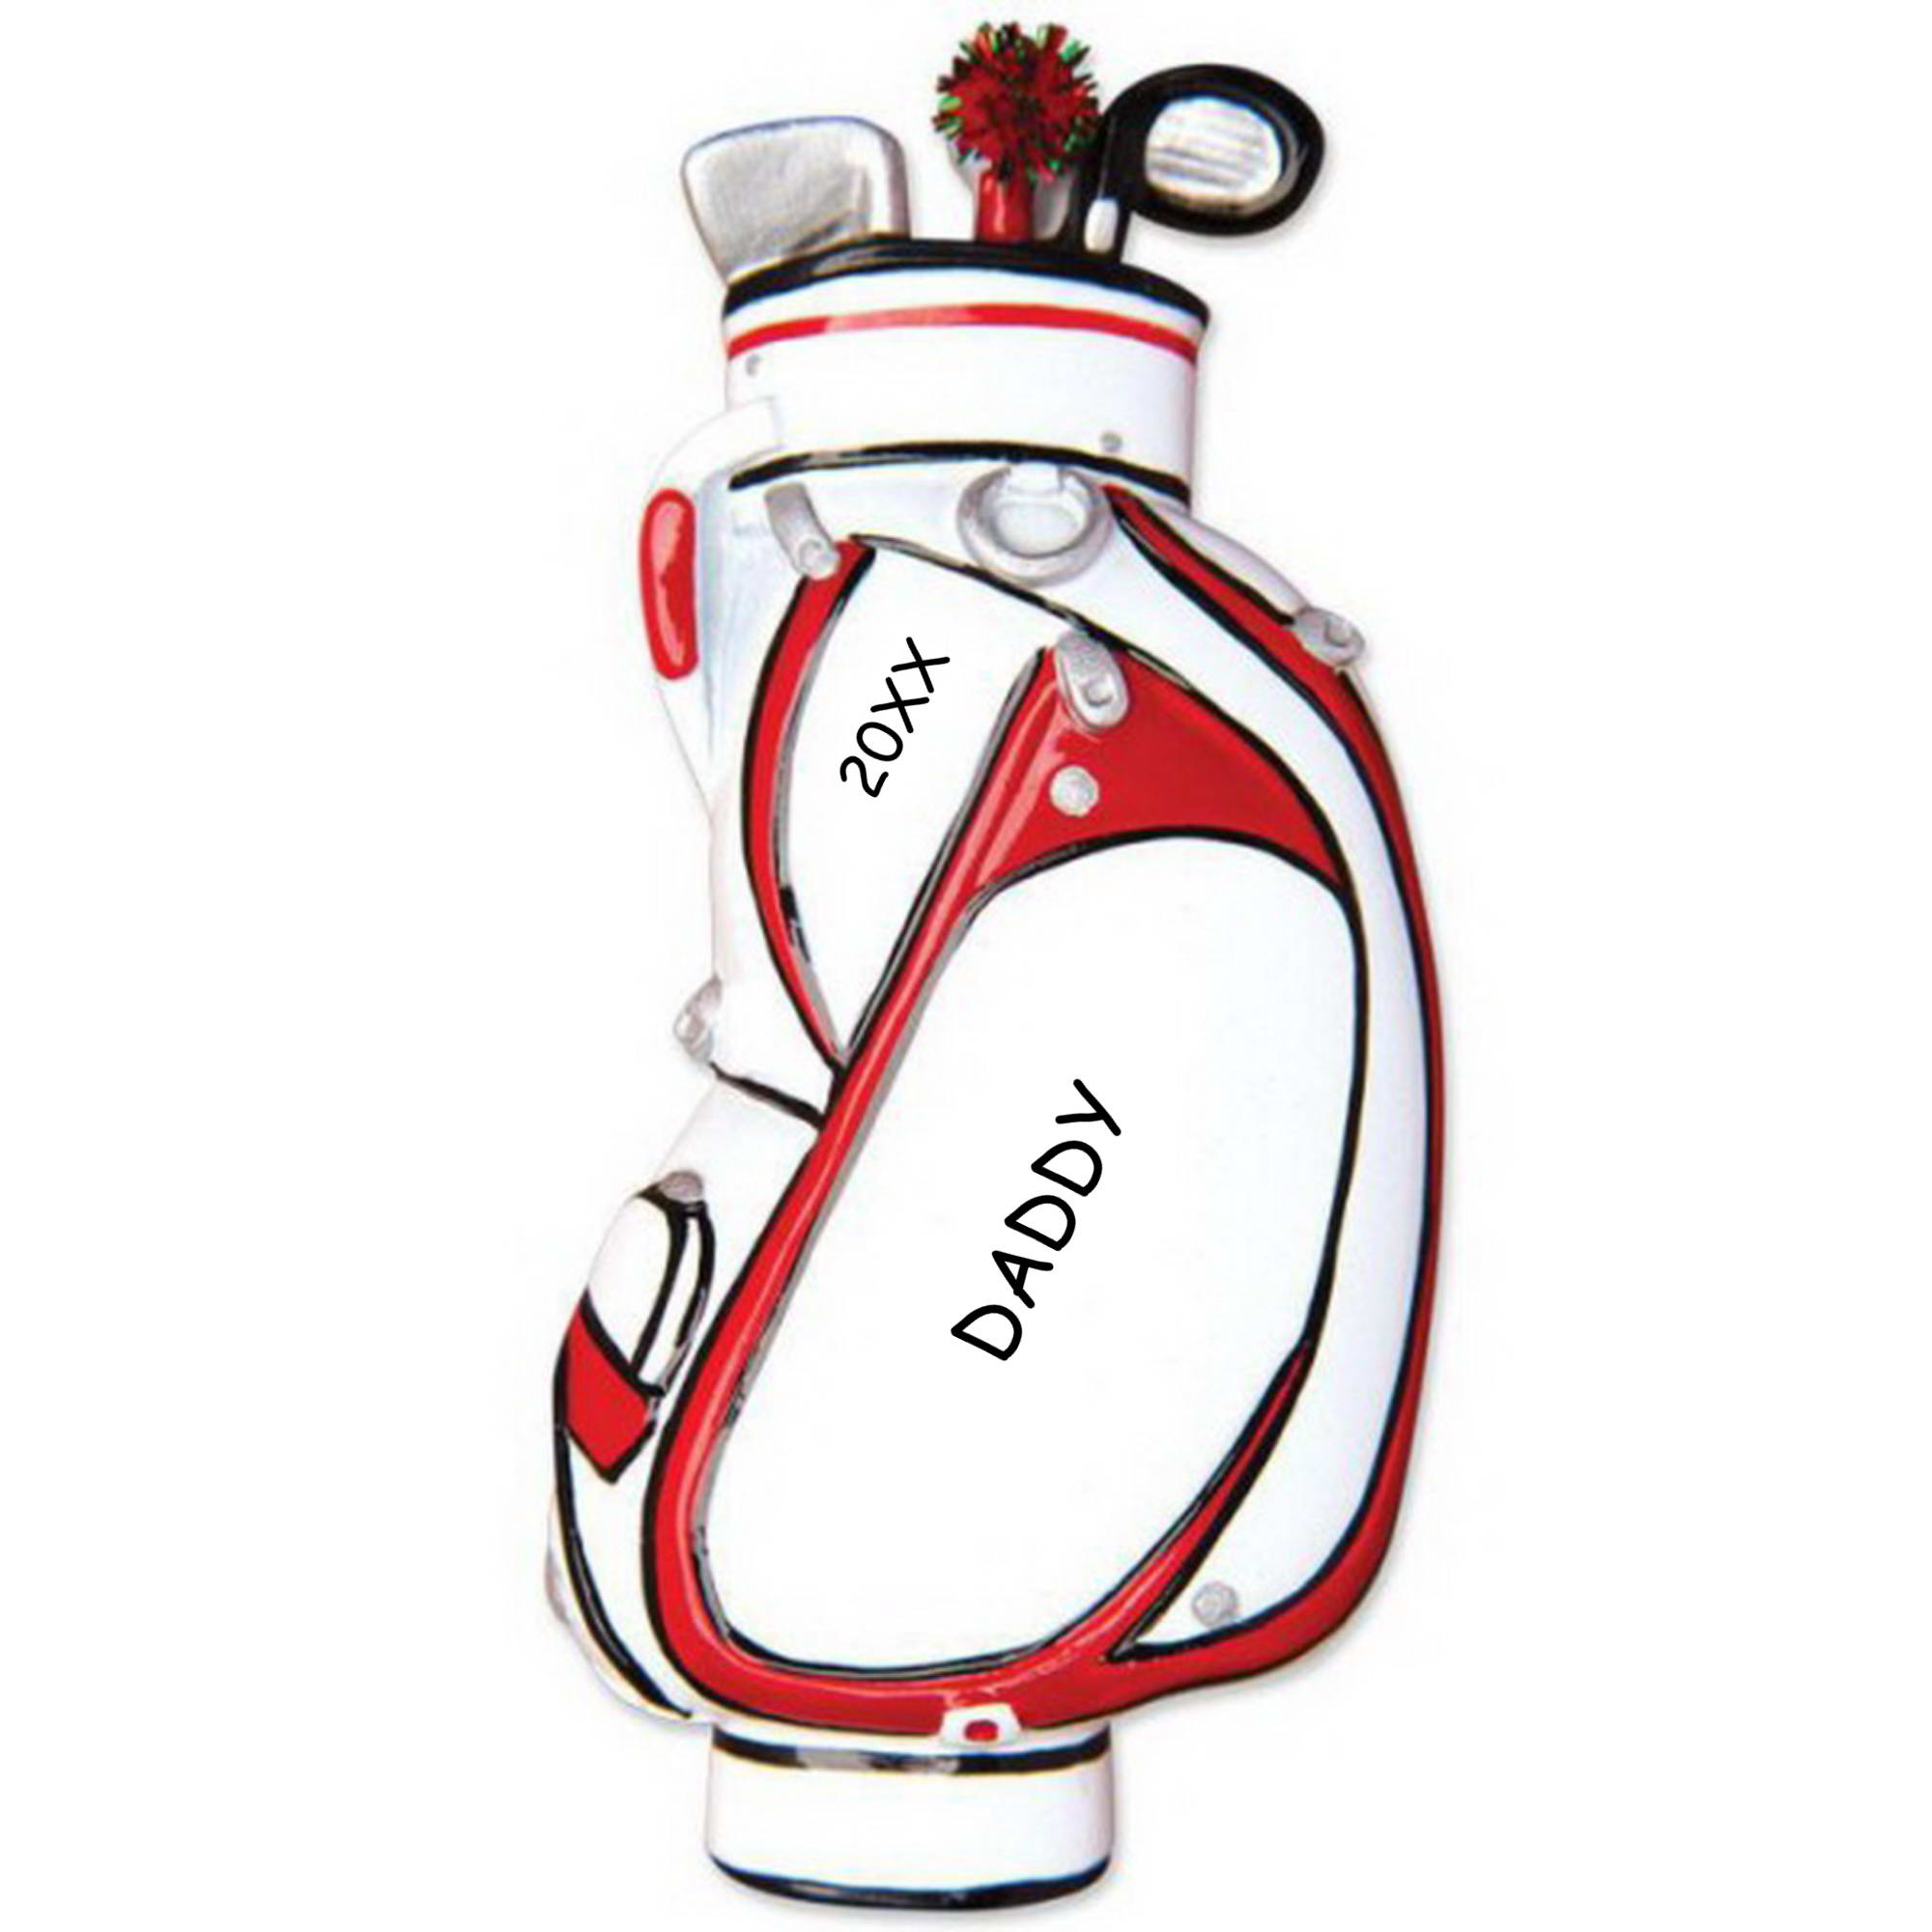 Personalized Golf Bag Christmas Ornament